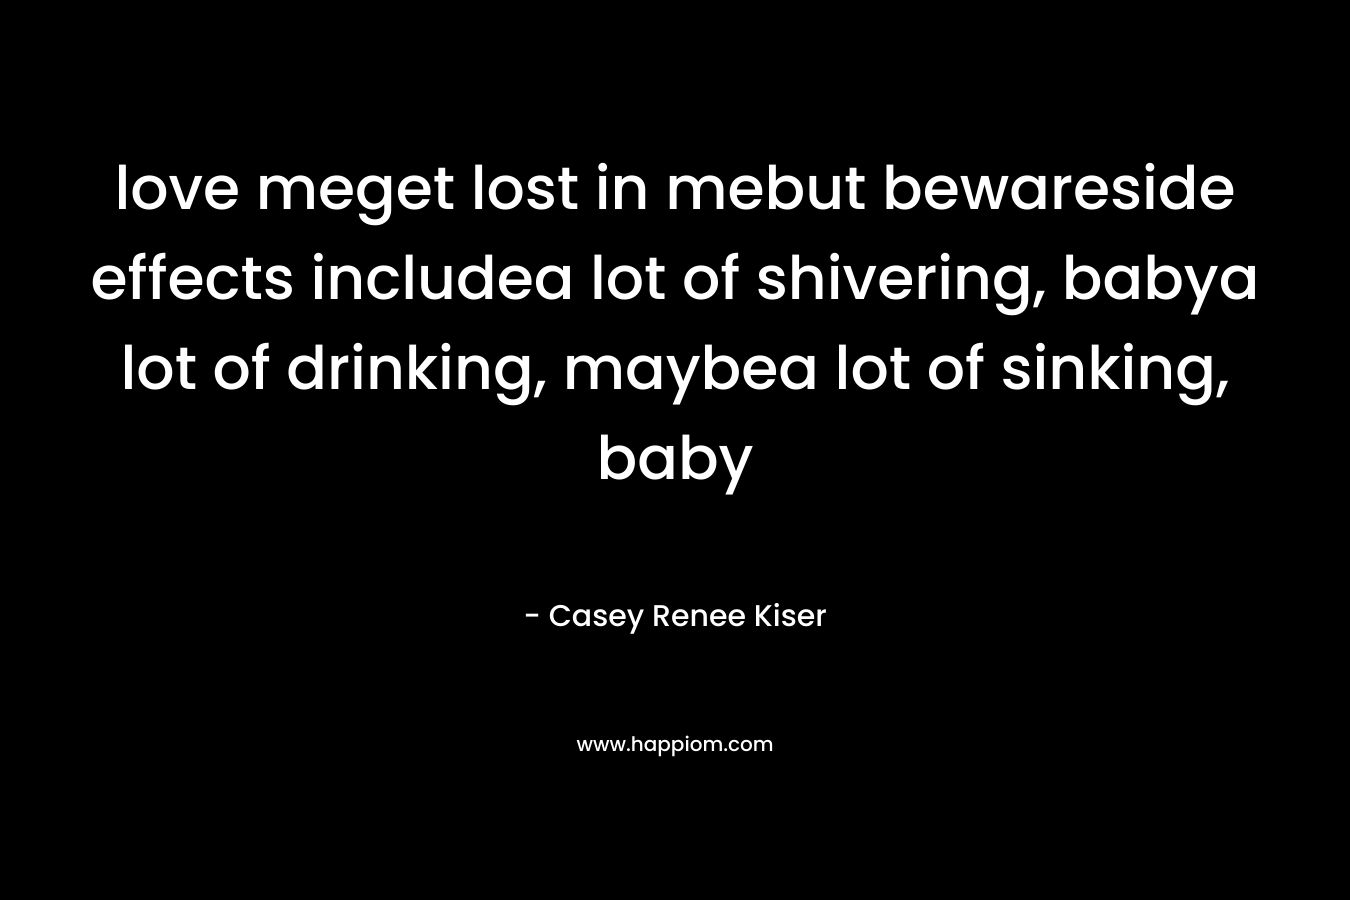 love meget lost in mebut bewareside effects includea lot of shivering, babya lot of drinking, maybea lot of sinking, baby – Casey Renee Kiser